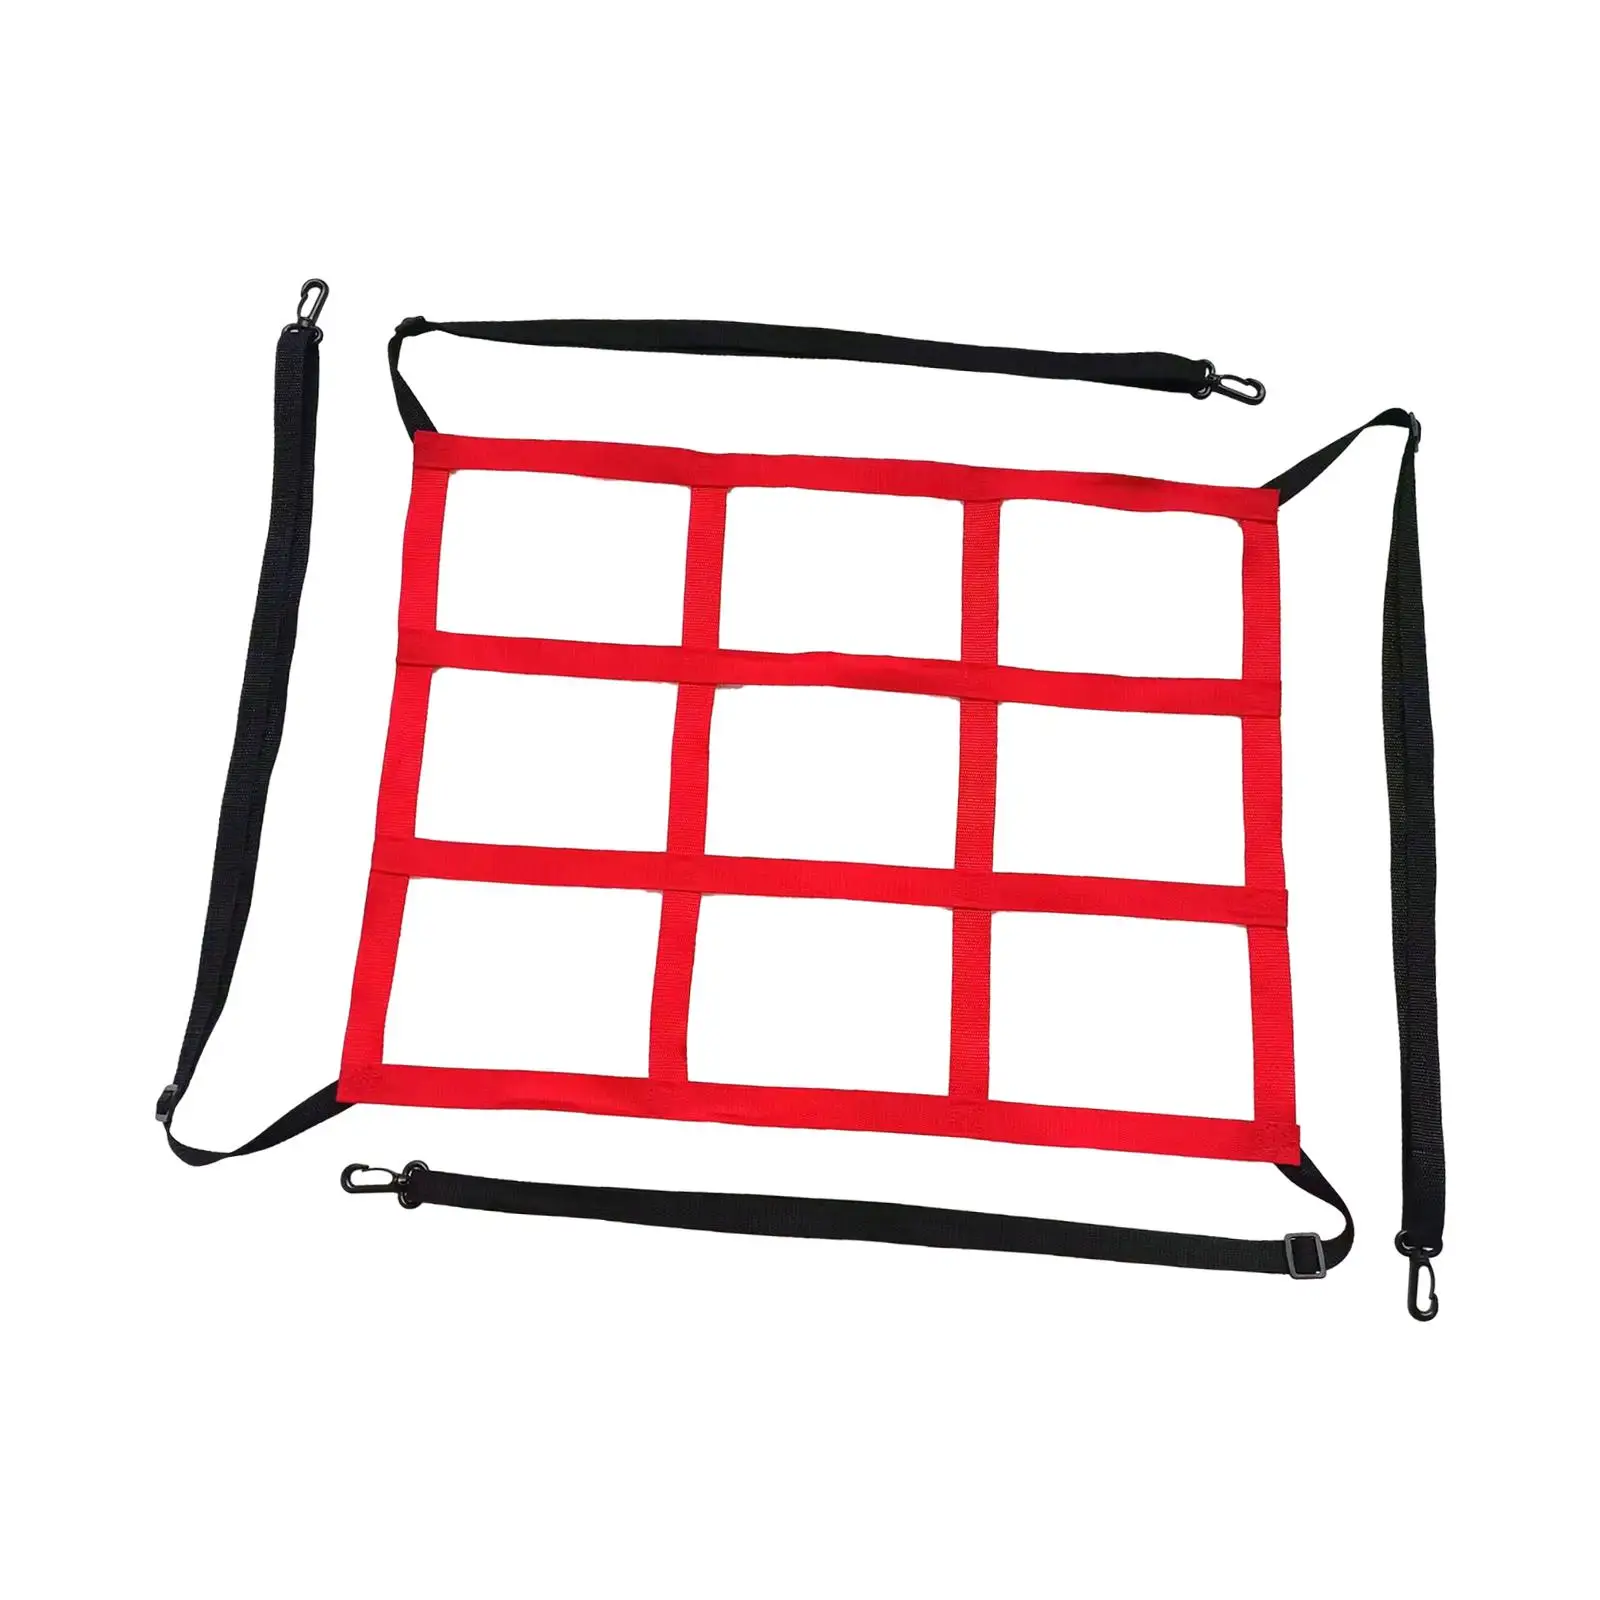 Target Training Net Goal Frame Net Target Adjustable Training Aid for Scoring and Finishing Practice Portable Accuracy Training